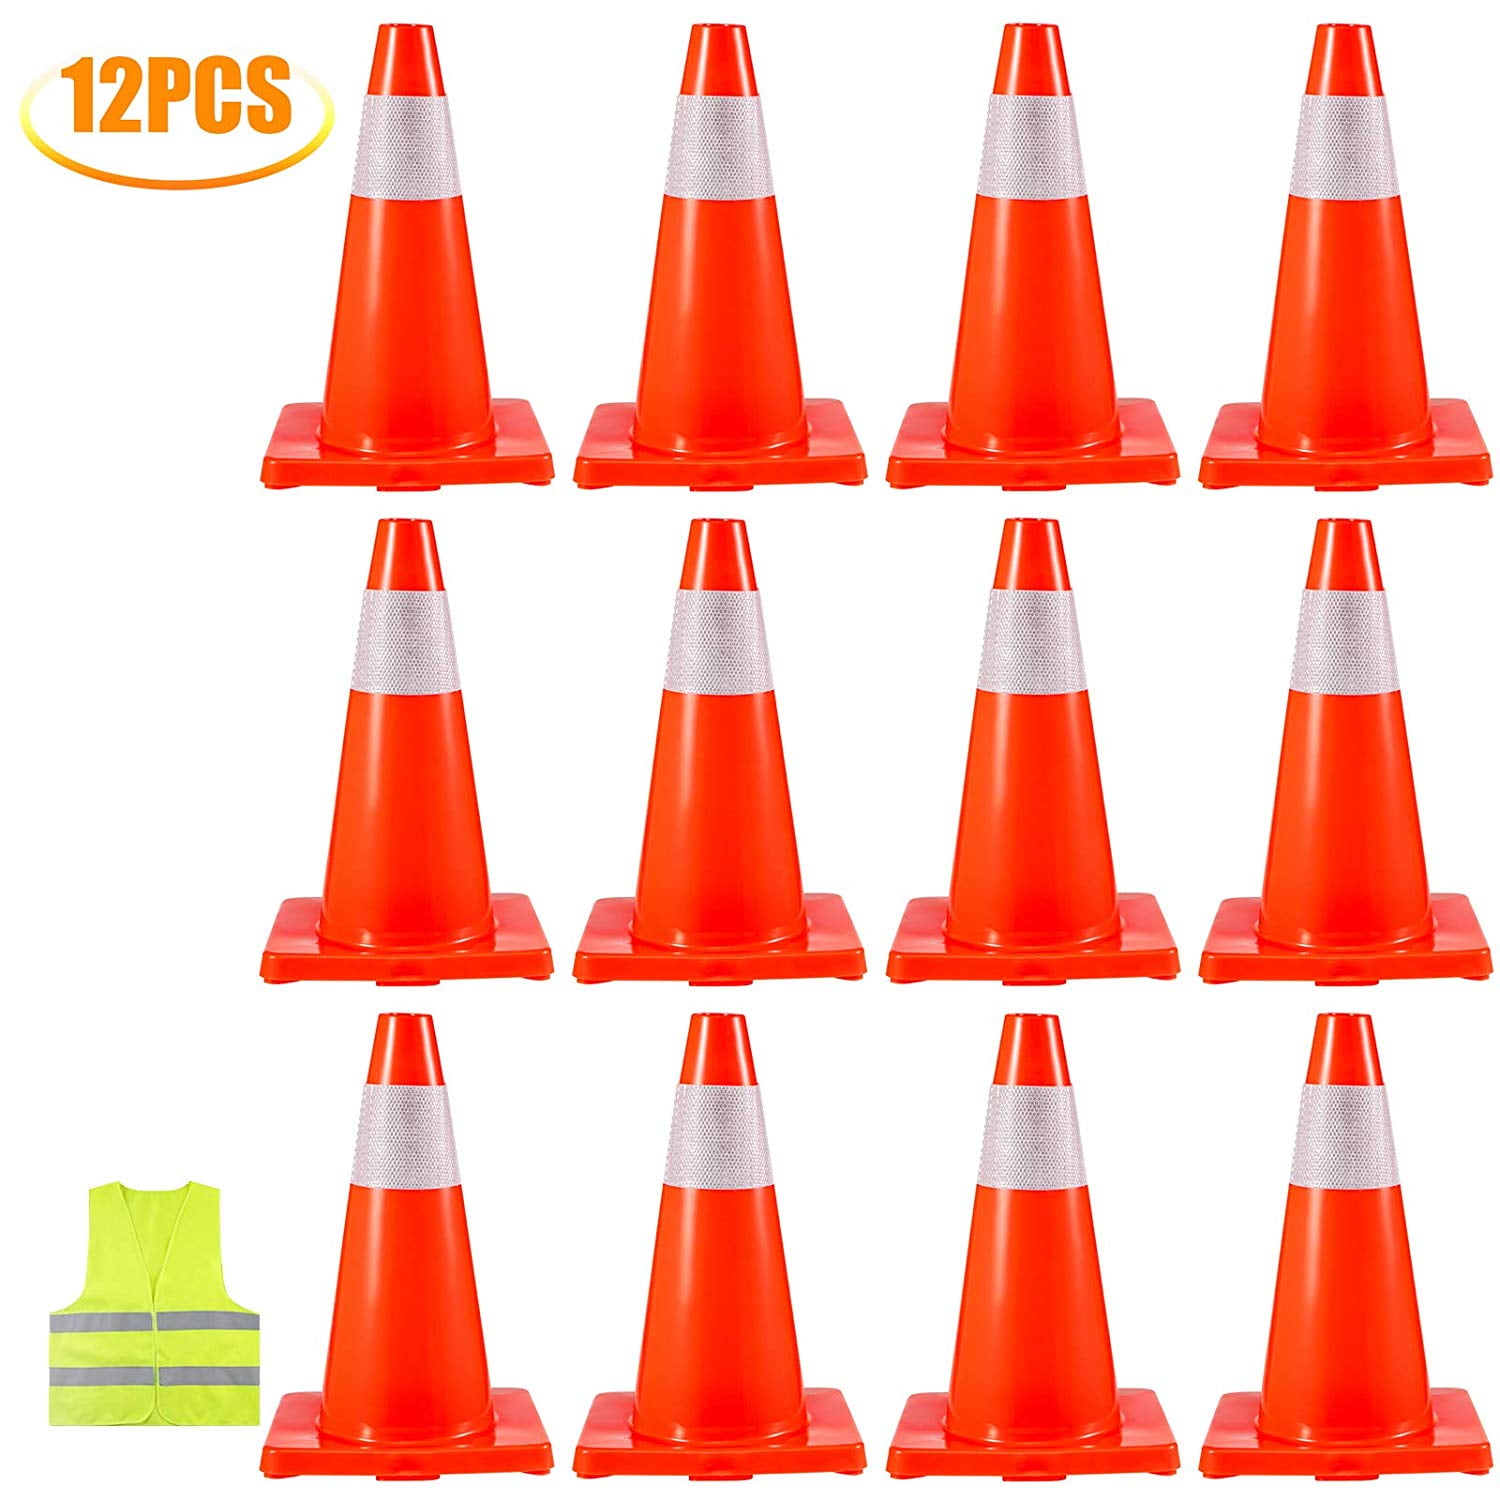 Folded 18inch Traffic Cones Overlap Parking Emergency Road Safety Cone Portable 